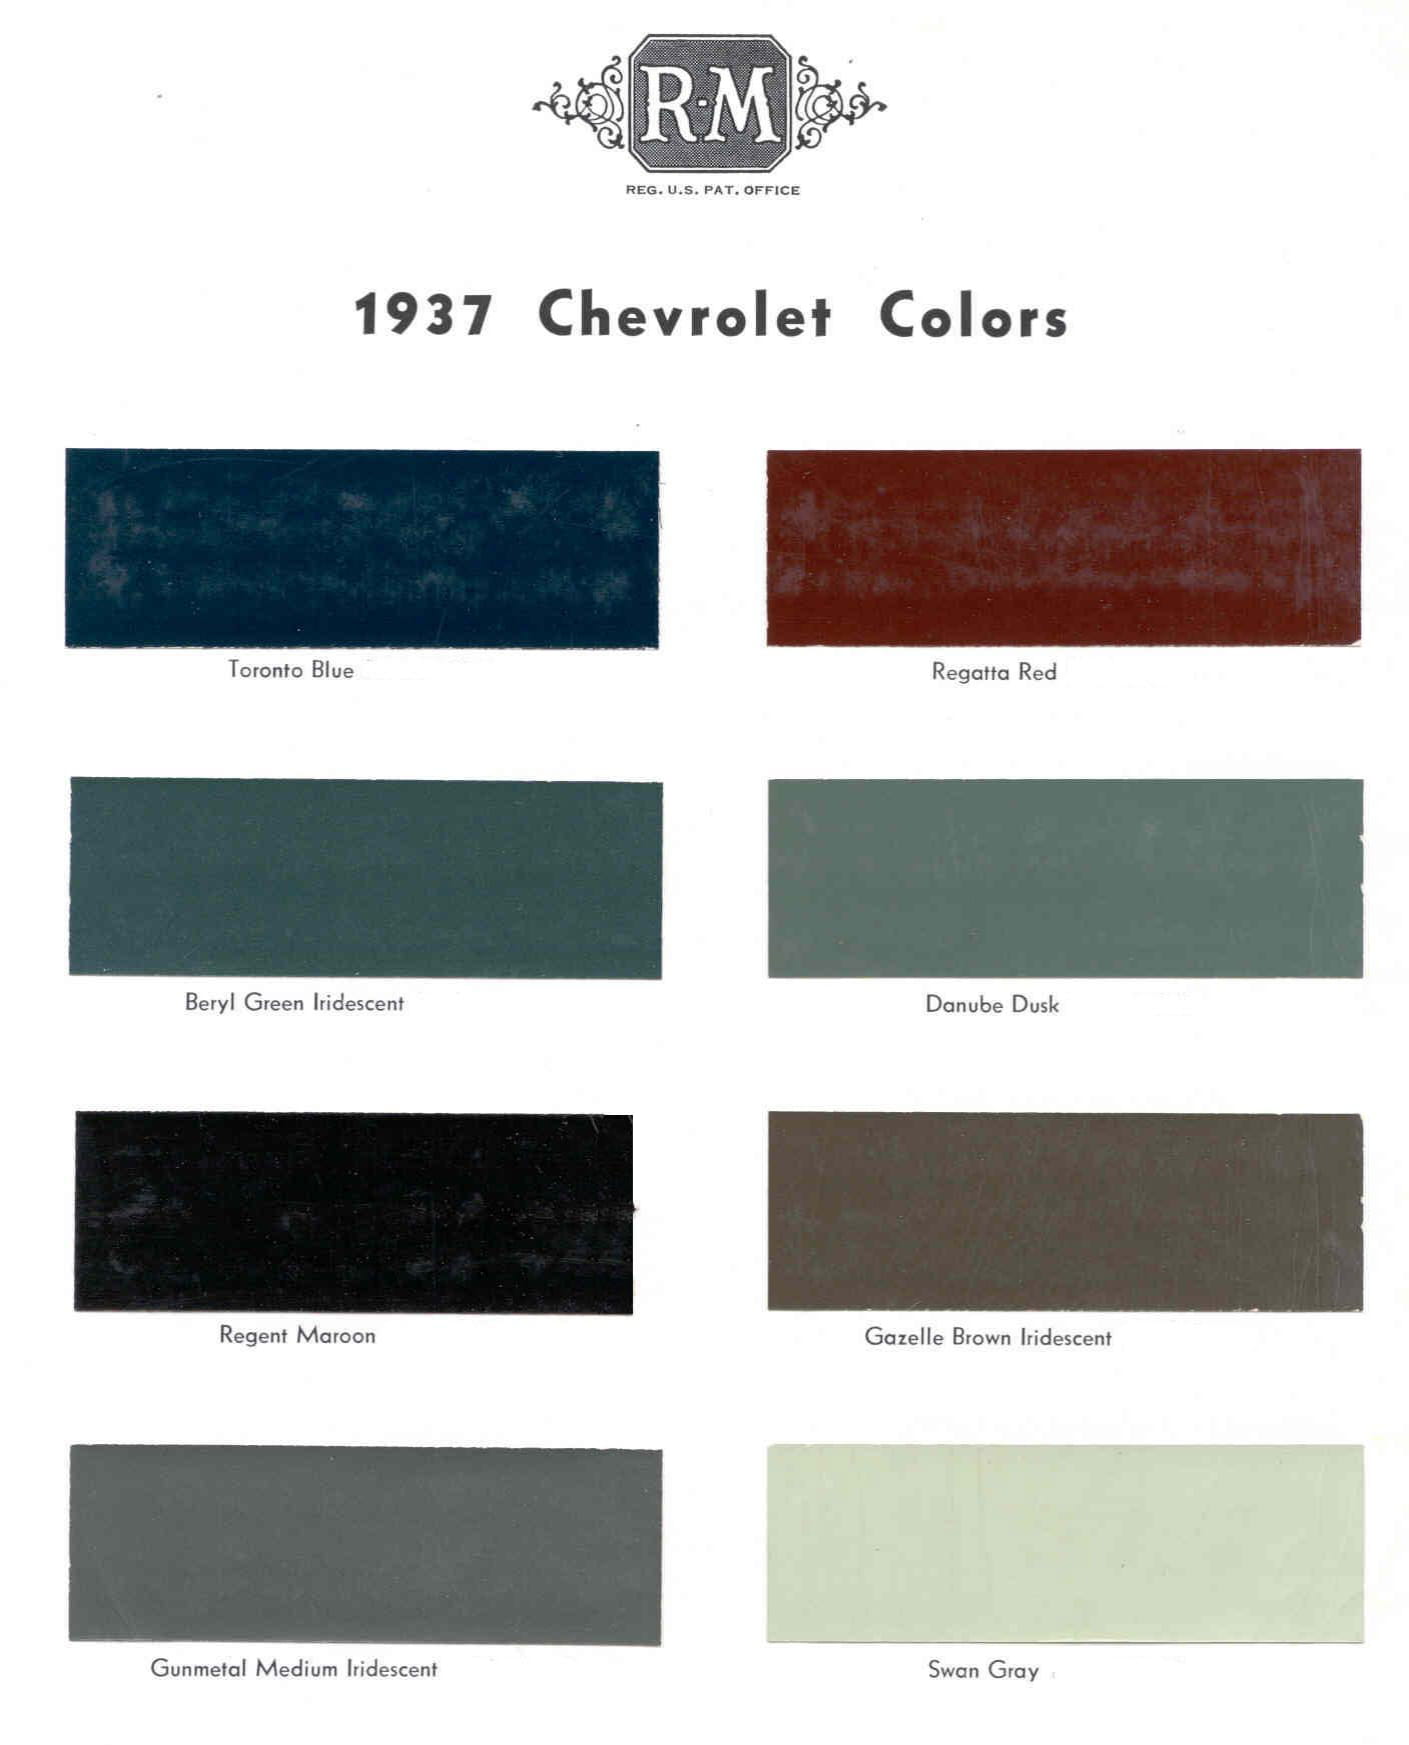 Exterior Colors used on 1937 Chevrolet Vehicles